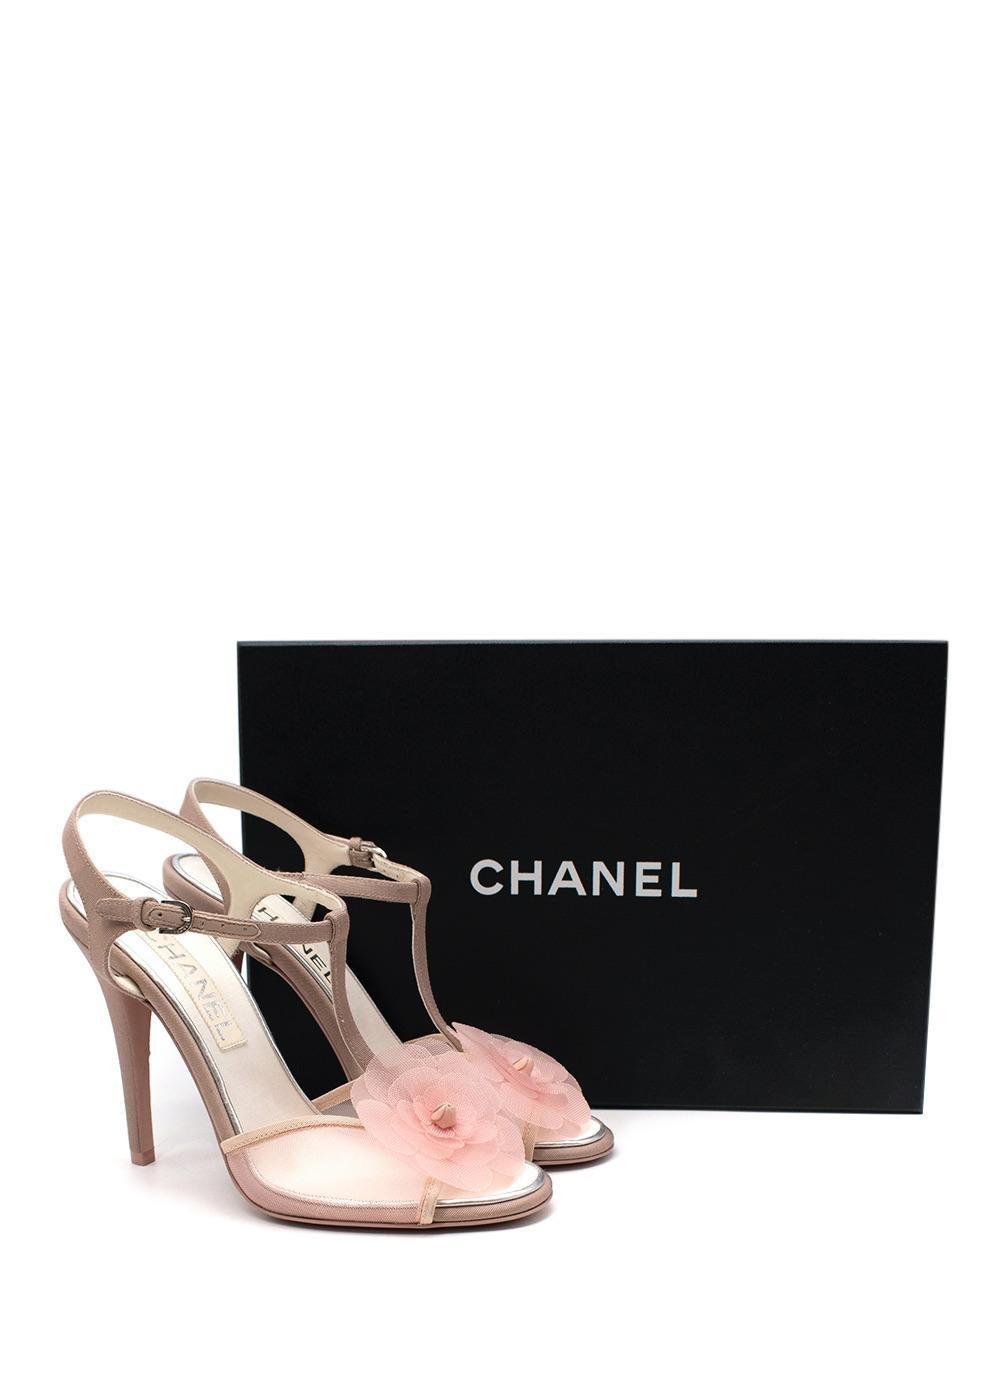 Chanel Mesh Camellia Sandals

- Crafted in canvas and mesh these strappy heeled sandals are finished with a textural 3D flower on the peep toe
- Set on a stiletto heel 
- Adjustable buckle strap 
- Lined in cream satin

Materials
Mesh
Canvas
Satin